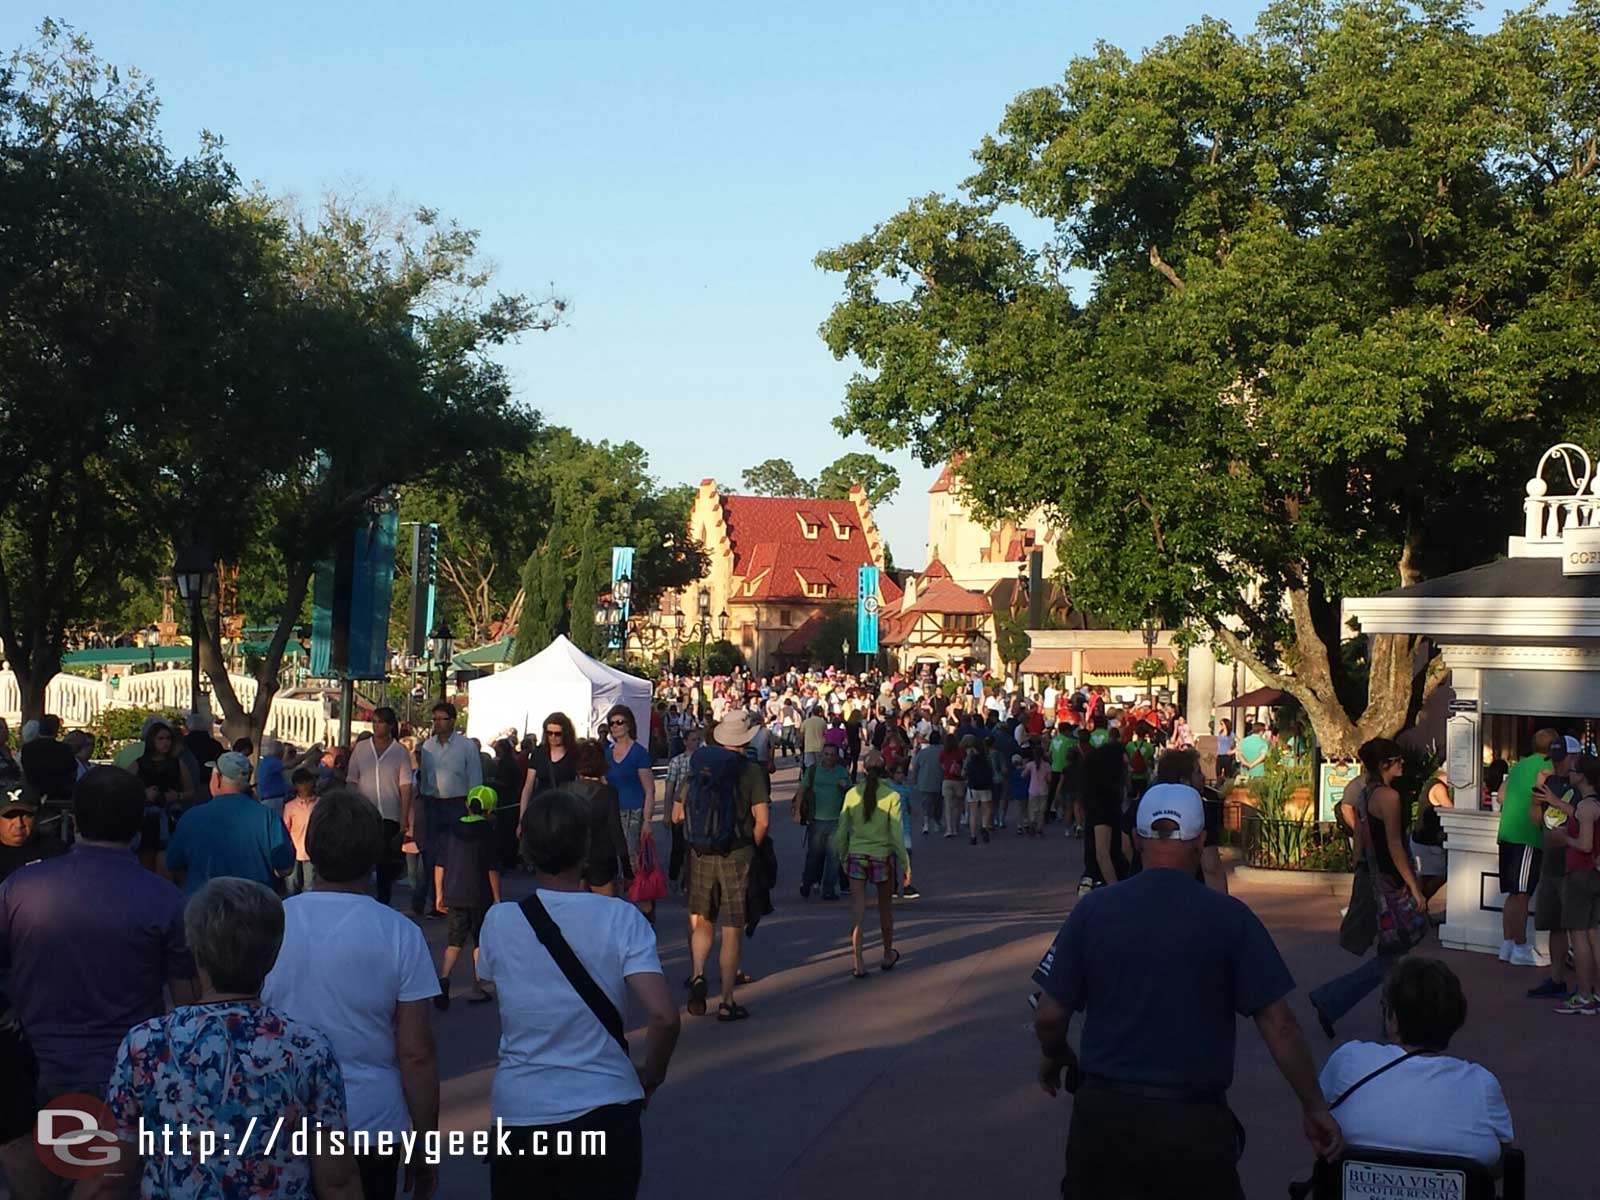 World Showcase was busy this evening